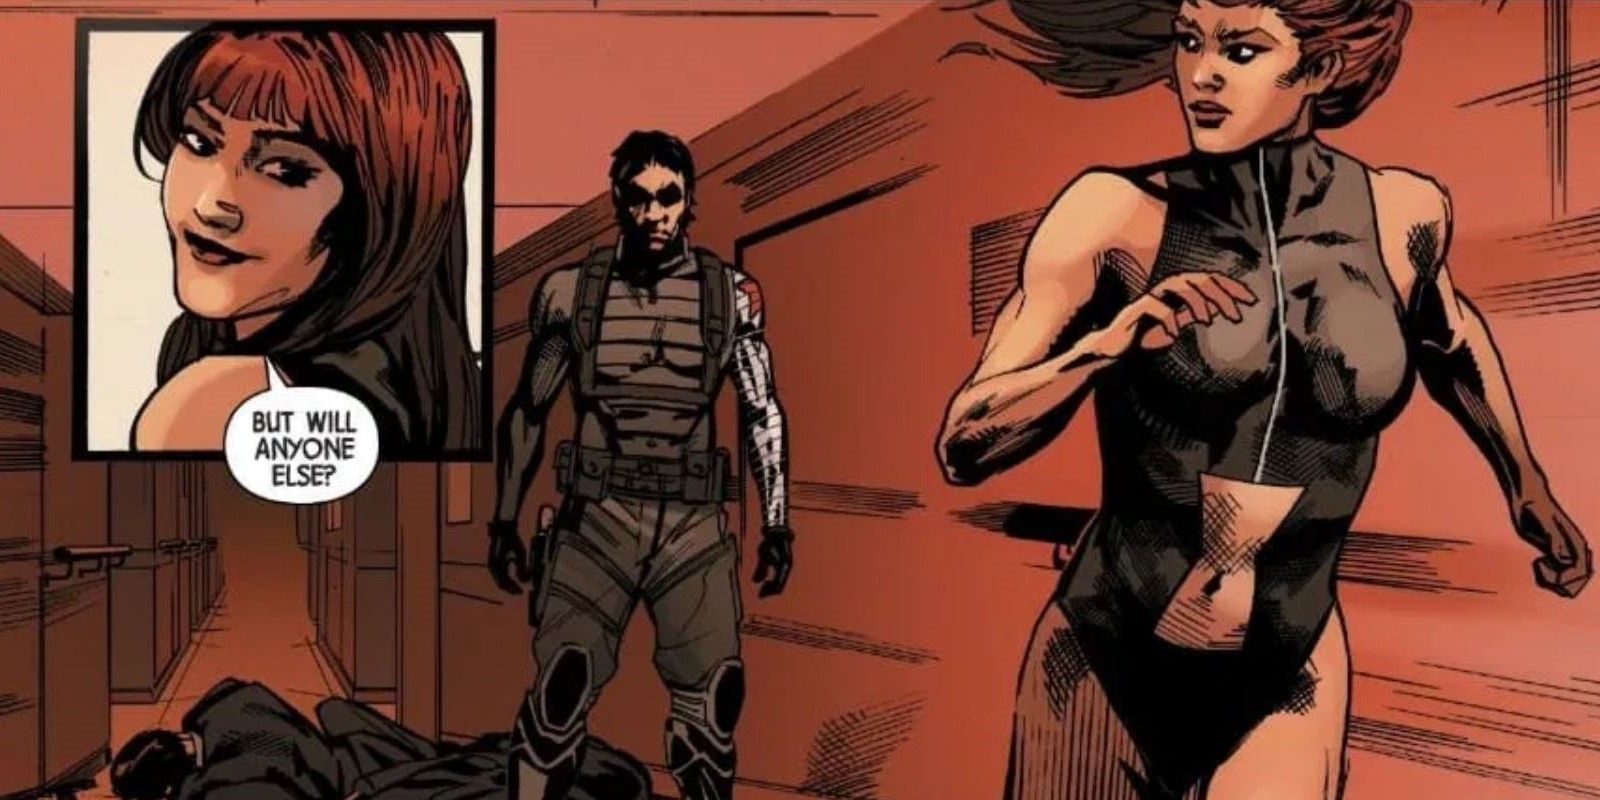 Black Widow runs from The Winter Soldier in Marvel Comics